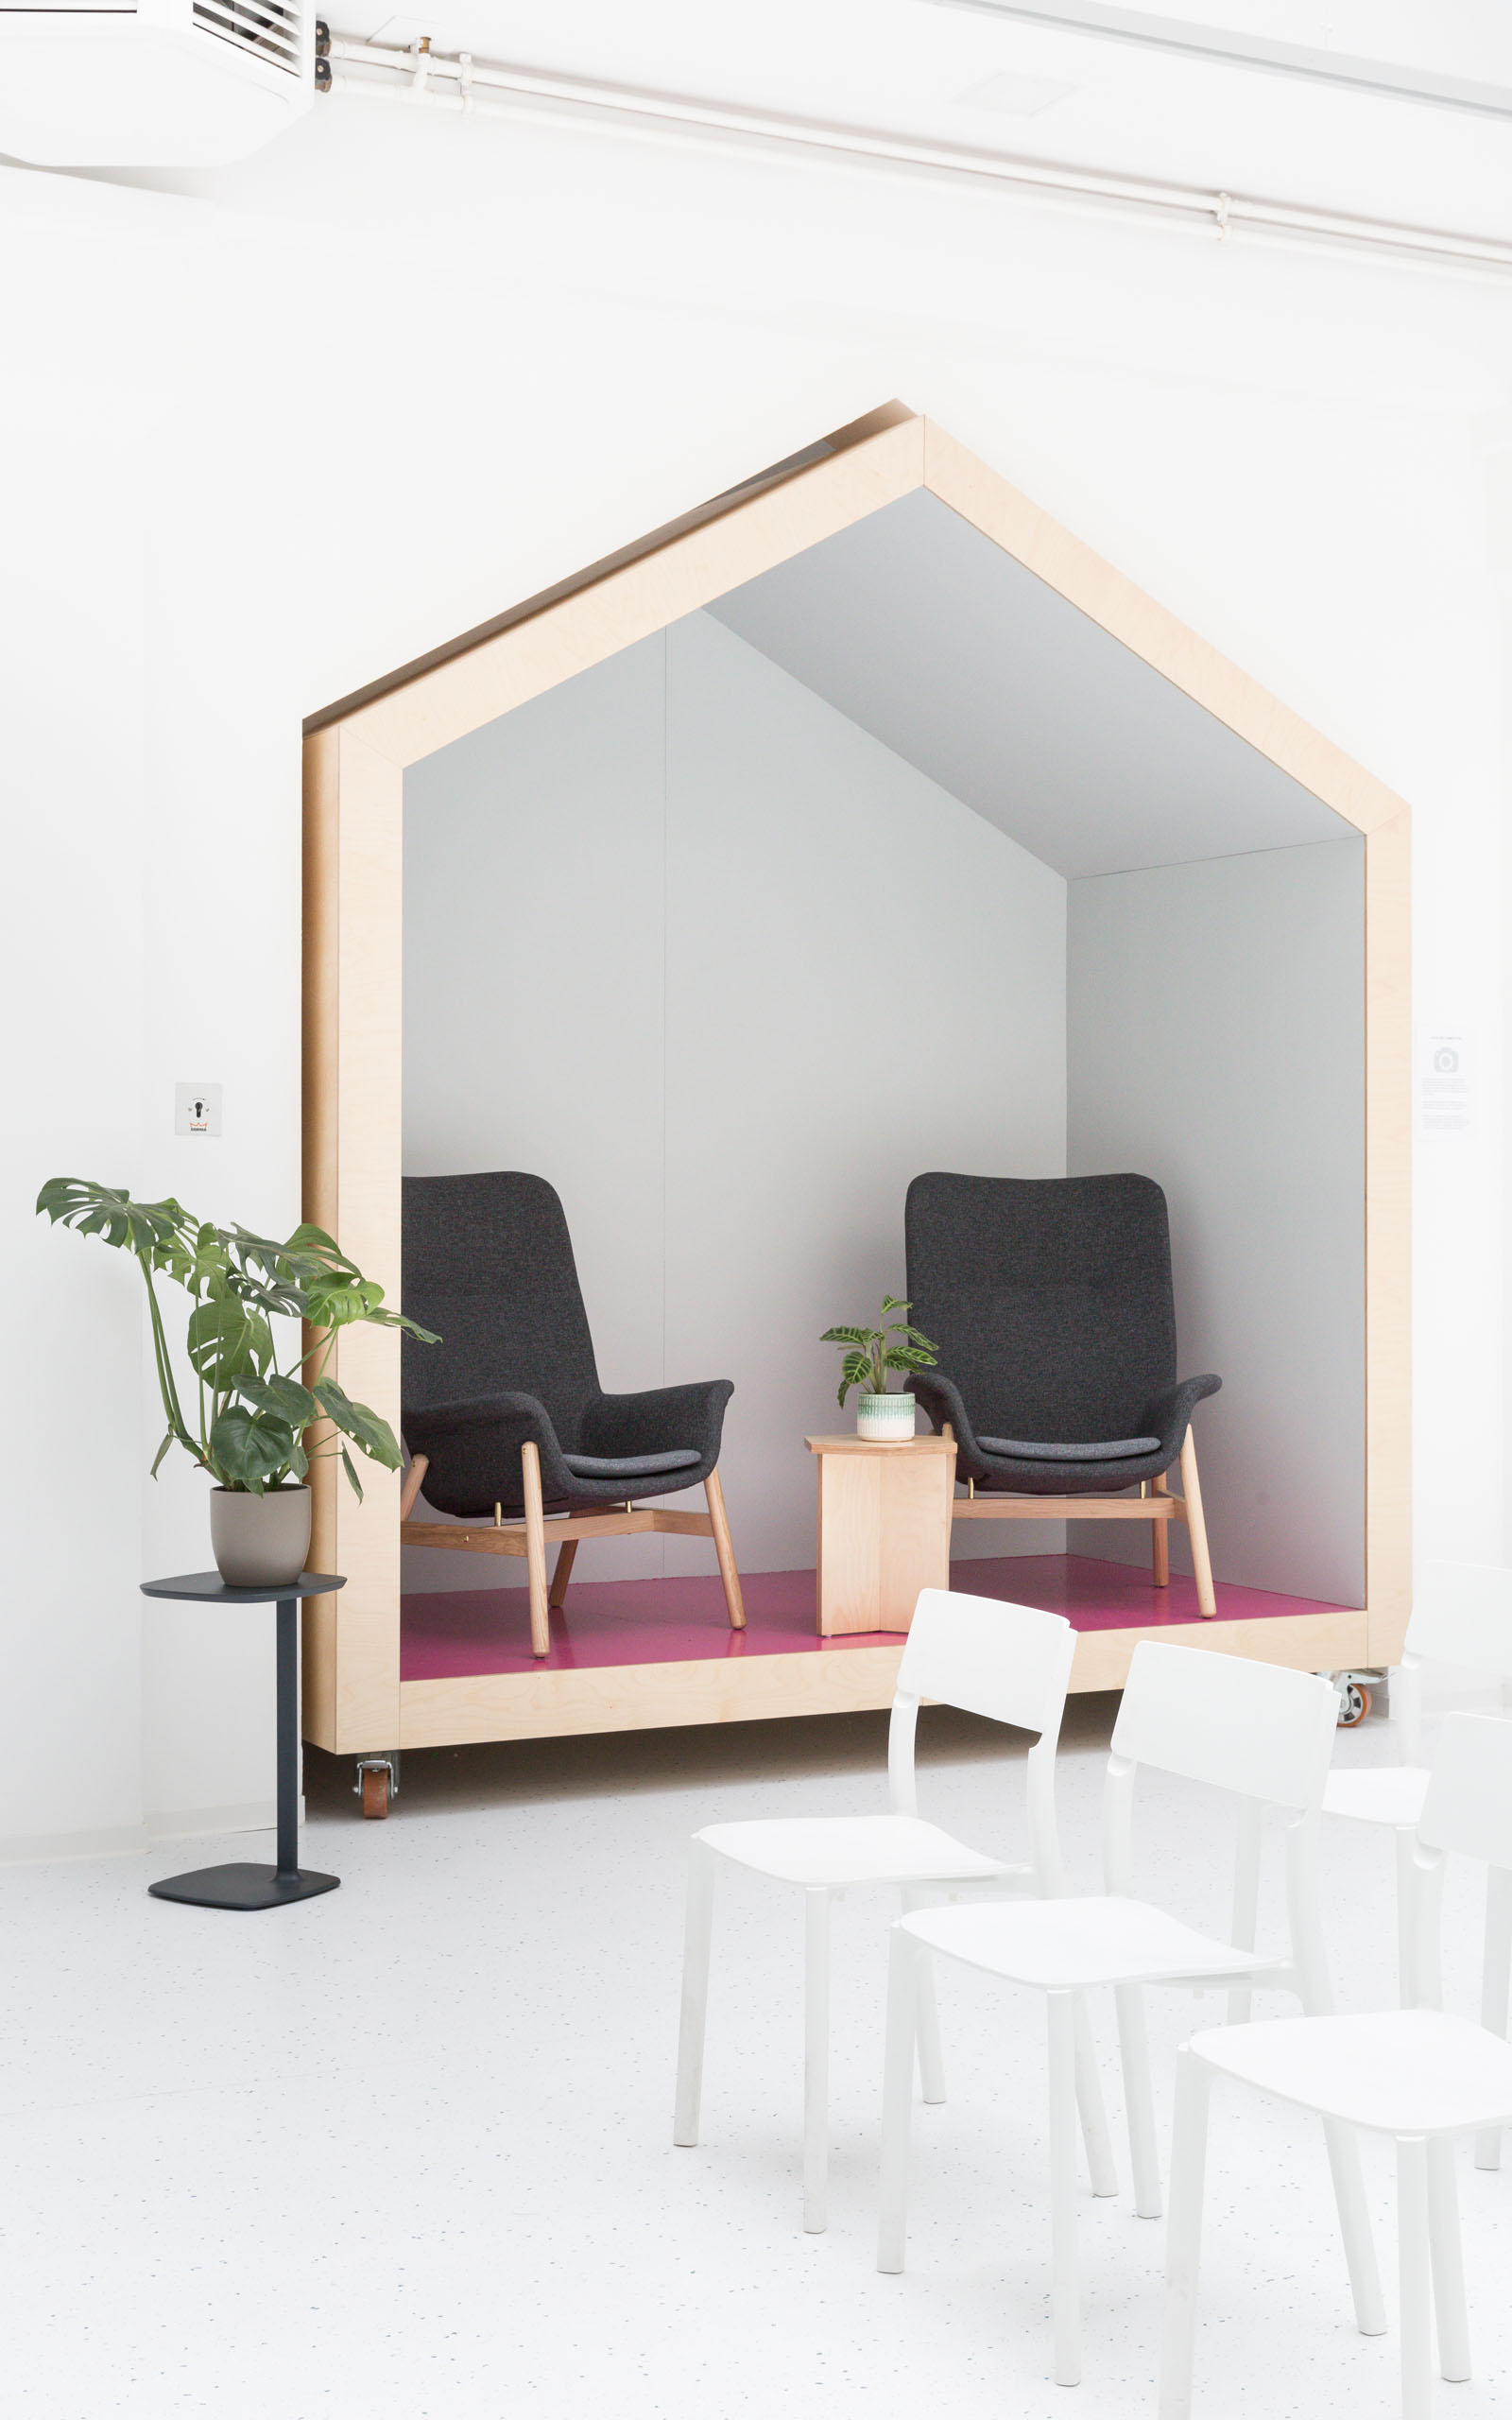 A type of microarchitecture in the iconic shape of a house standing in the Startraum coworking space.